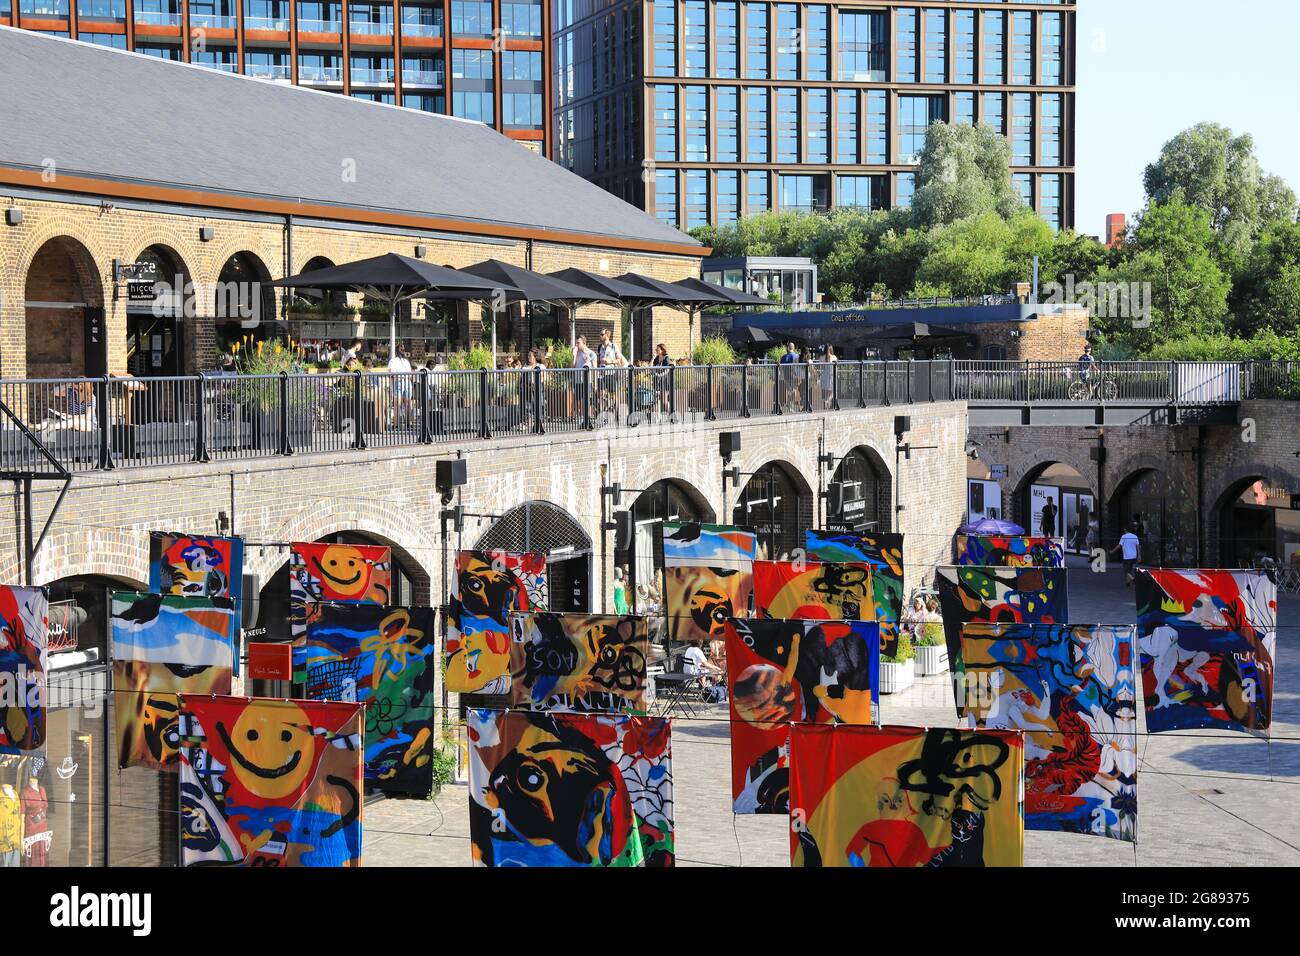 Bethany Williams' flag art installation 'All Our Stories' at Coal Drops Yard, Kings Cross, London, UK Stock Photo